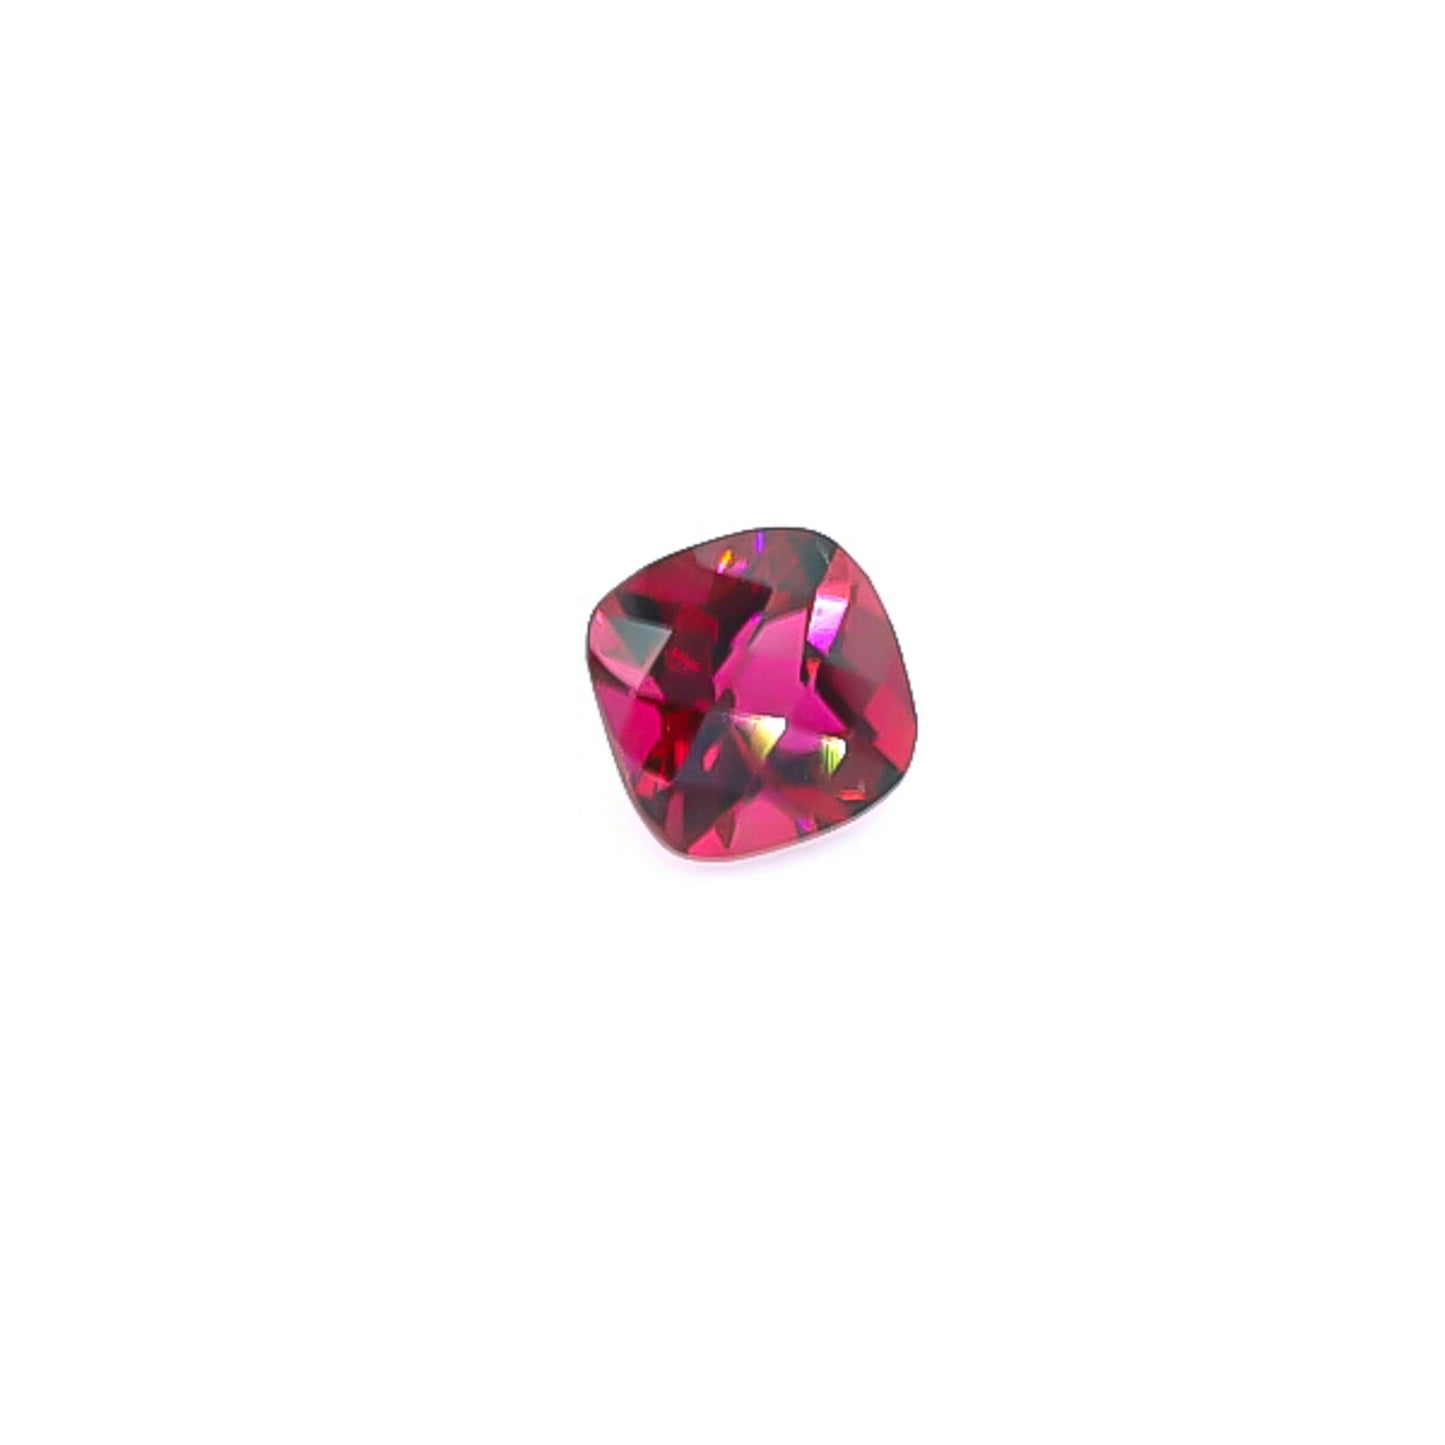 Load image into Gallery viewer, Natural Red Tourmaline or Rubellite Tourmaline 1.56 Carats
